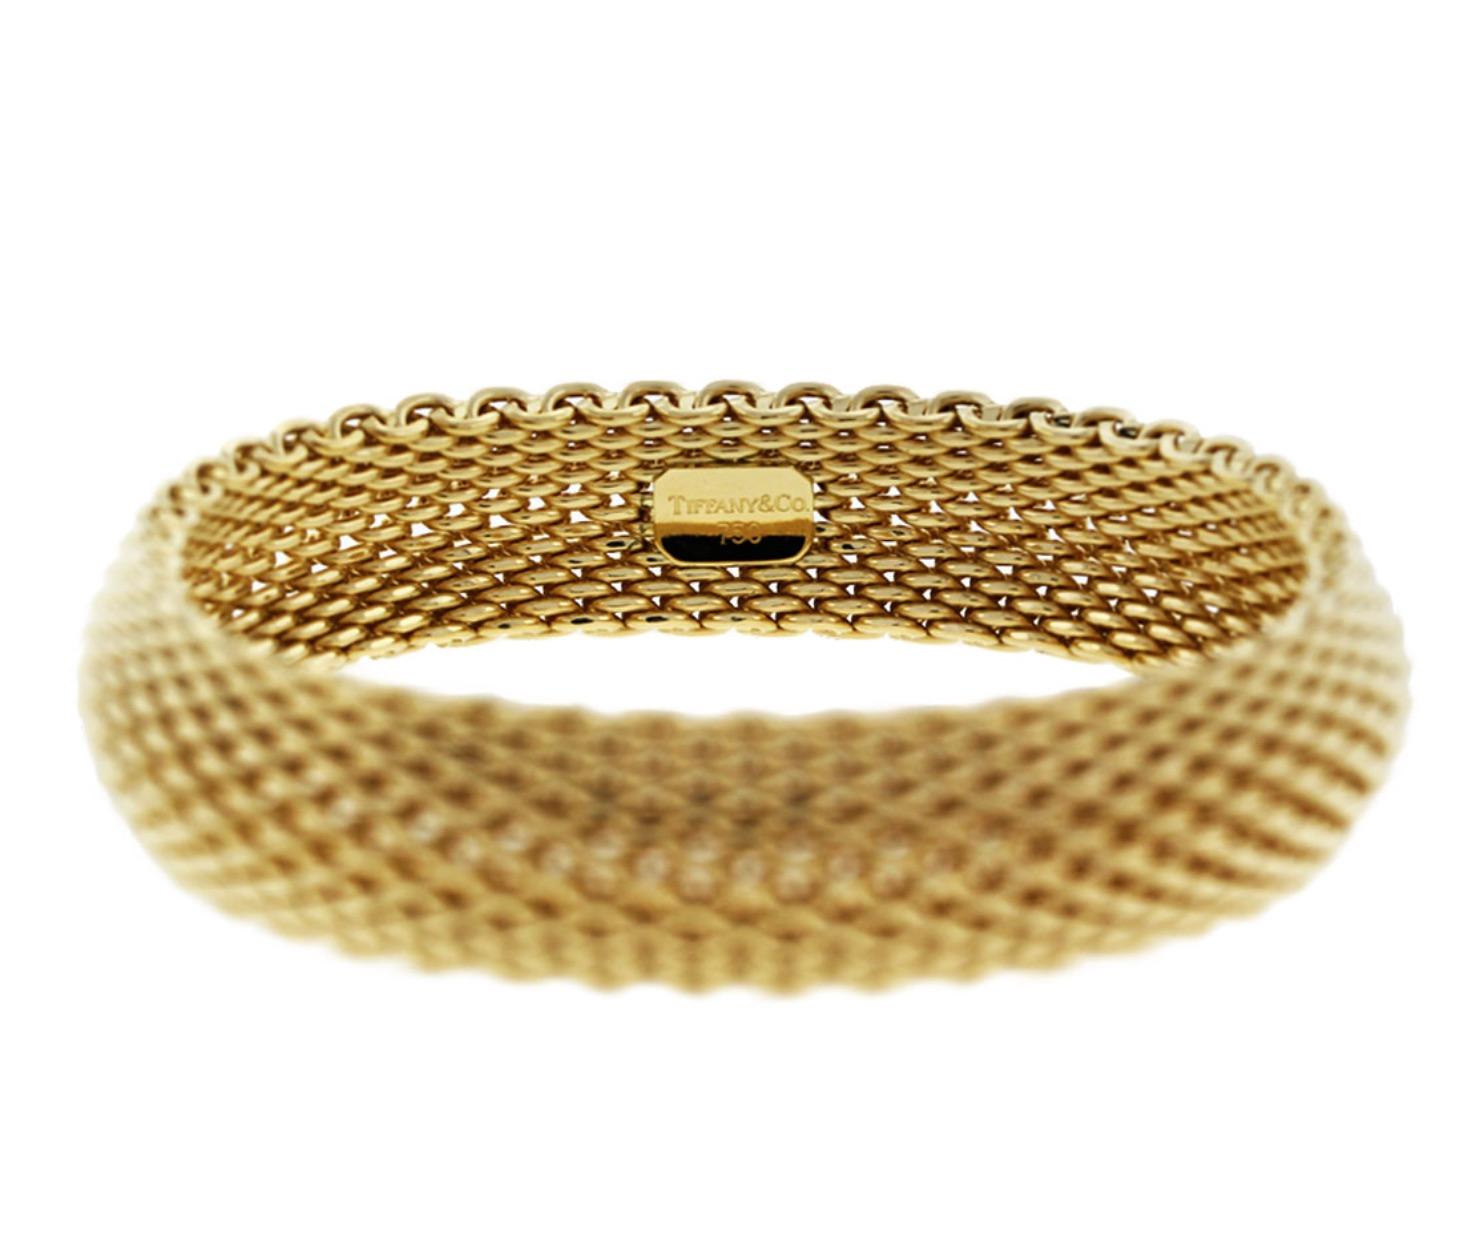 Tiffany & Co. 18 Karat Yellow Gold Somerset Mesh Bracelet Cuff 

Excellent Like New Condition 

Width - Approximately 15mm

18 Karat Yellow Gold

91.1 Grams 